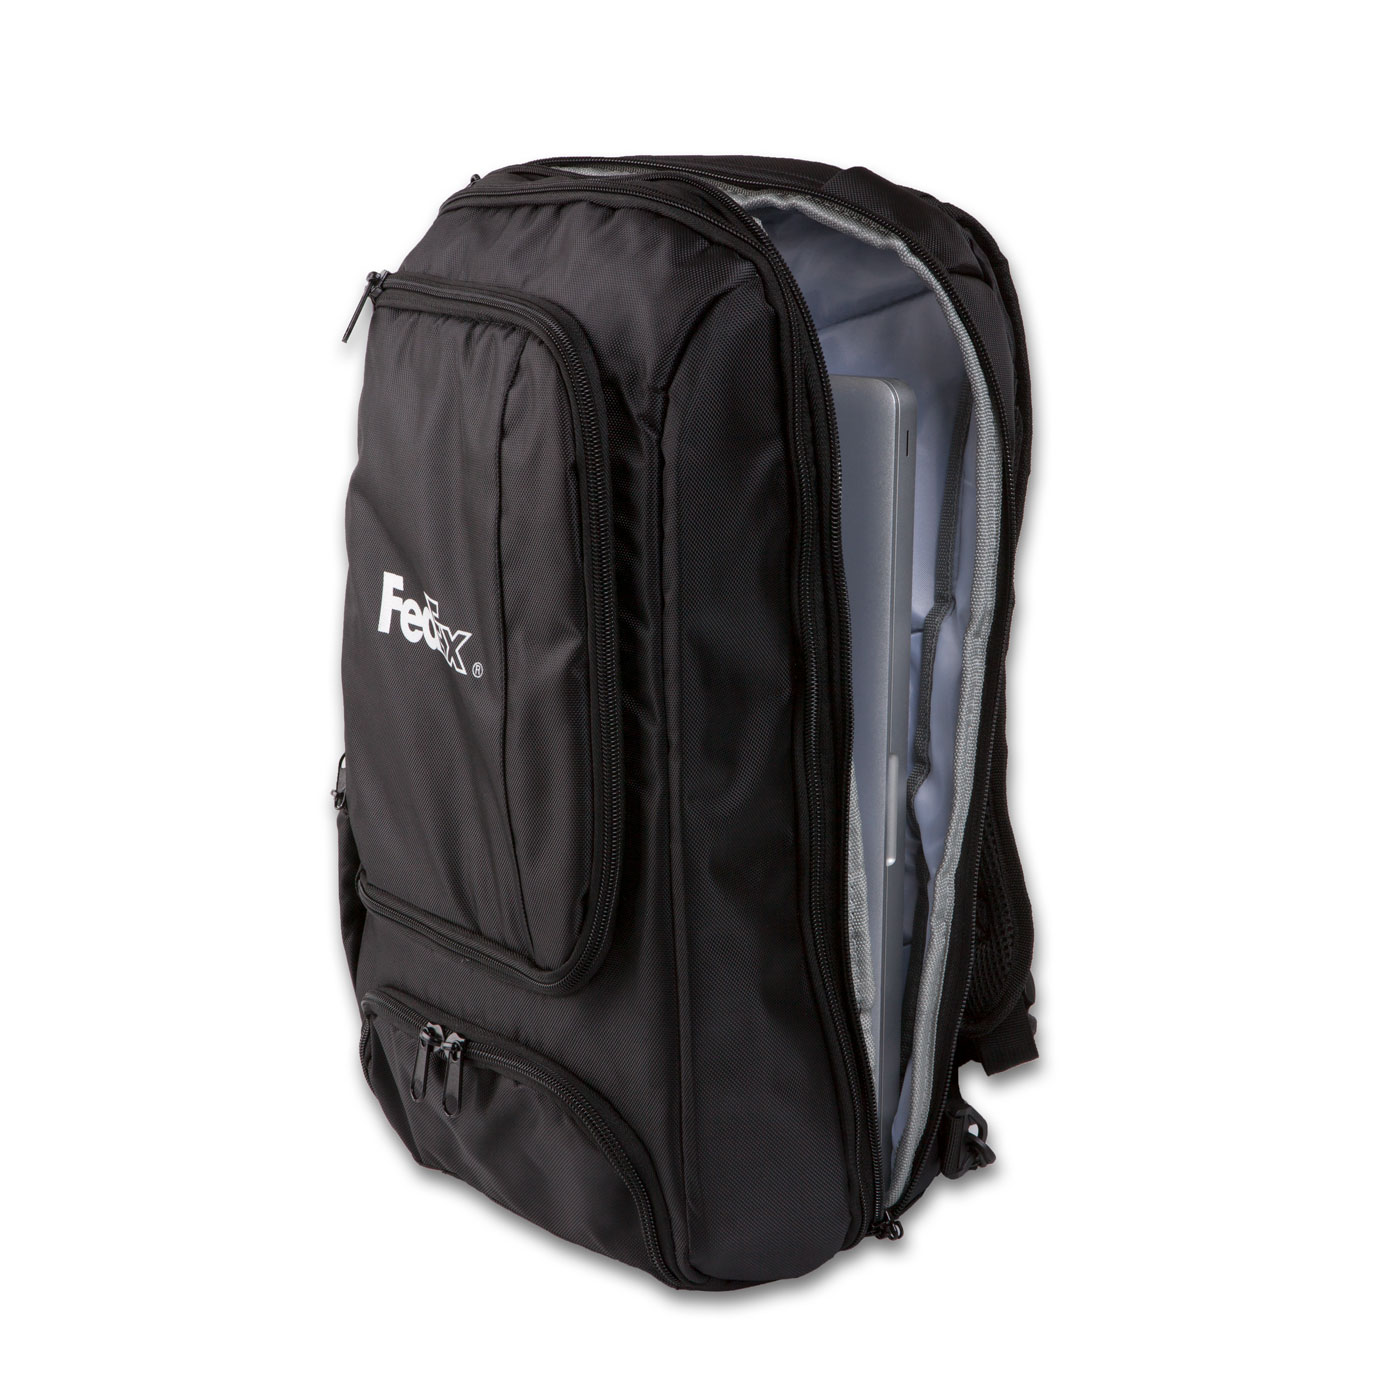 FedEx RFID Convertible Briefpack | The FedEx Company Store